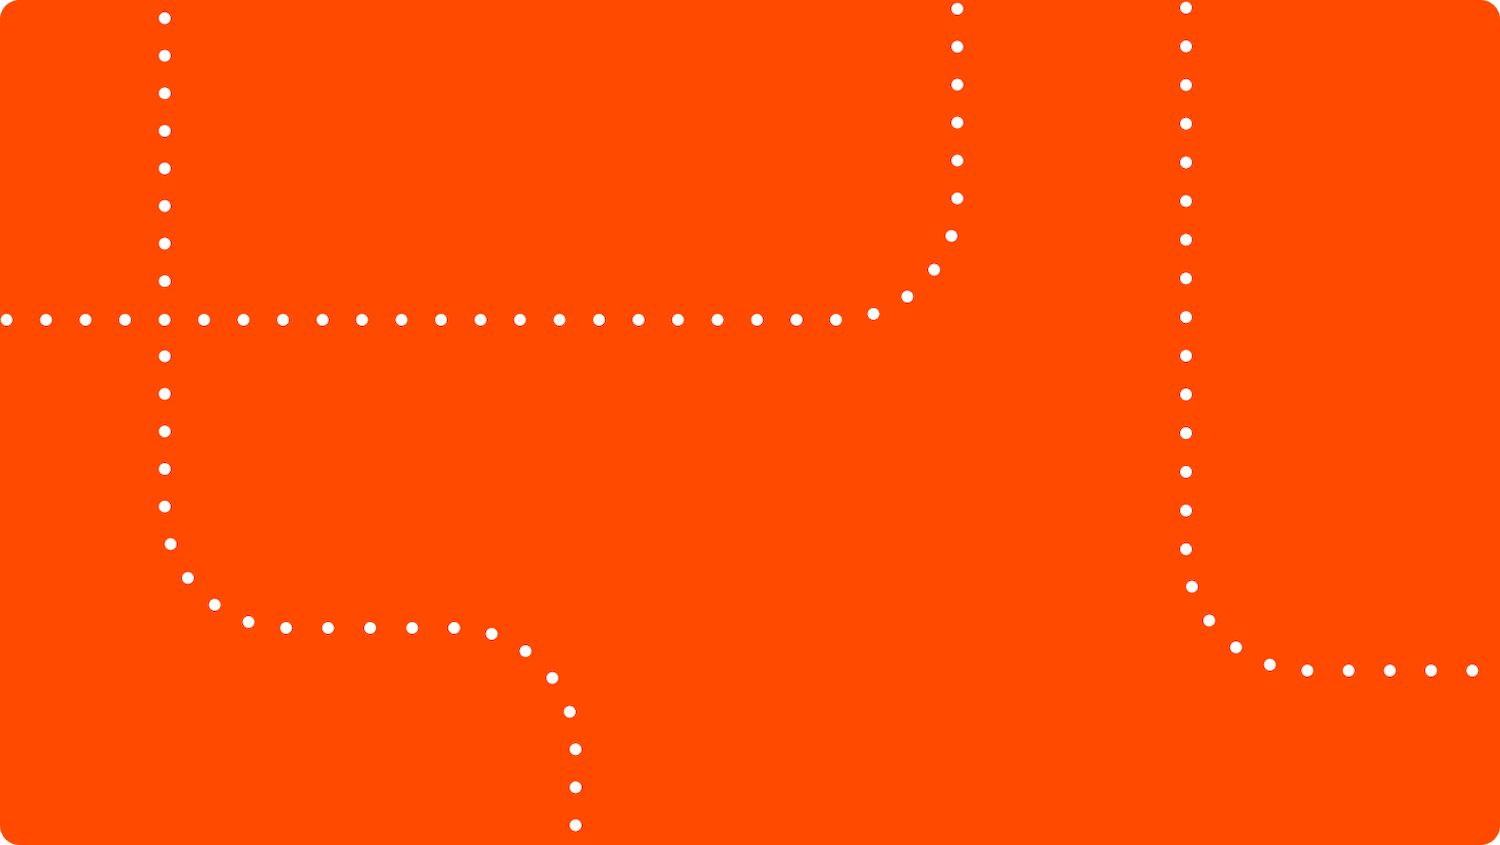 An orange rectangle with dotted white lines running through it